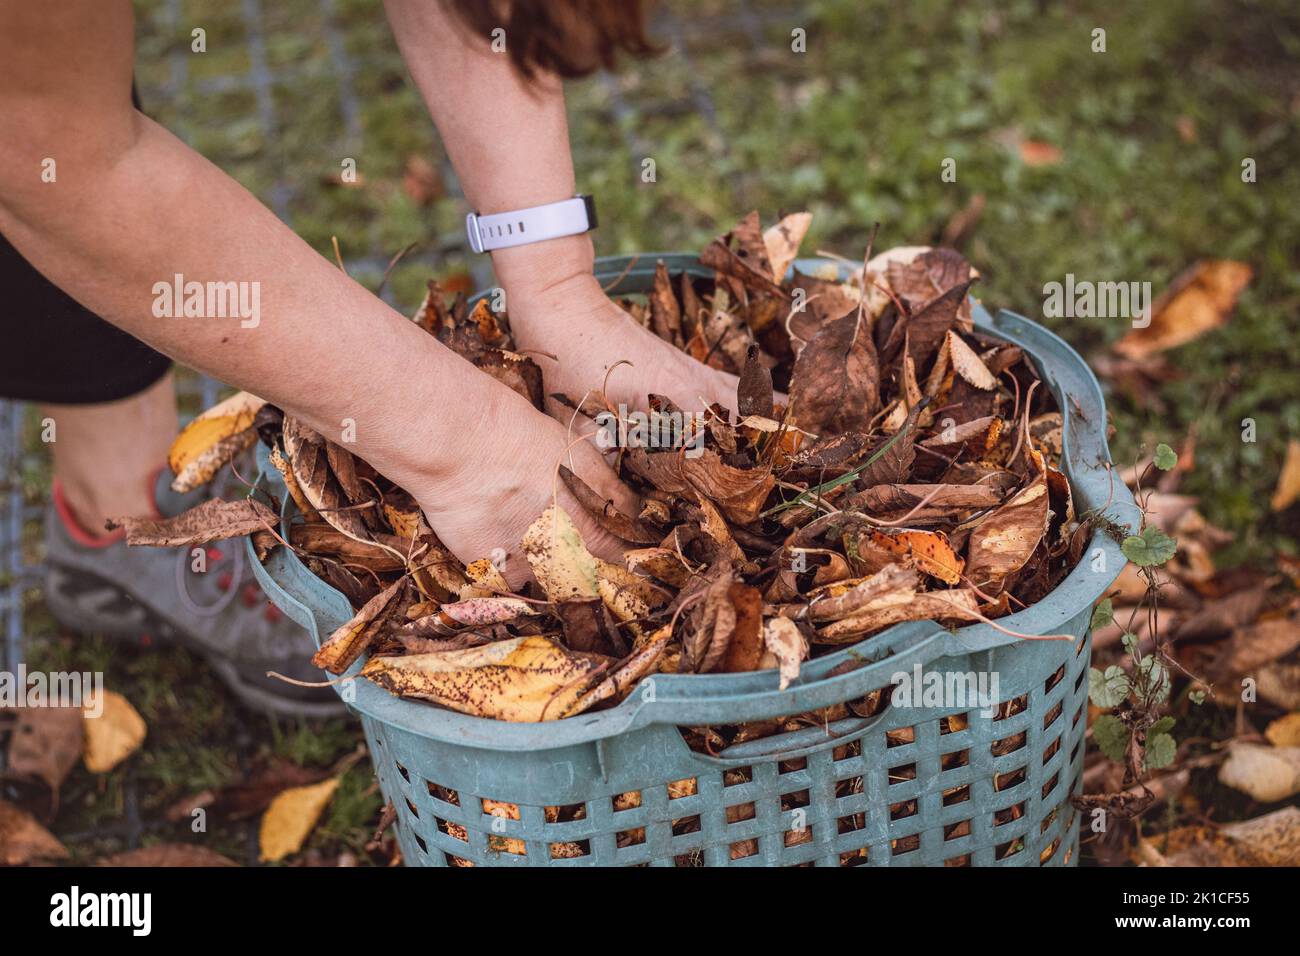 Woman rakes and picks up fallen coloured leaves and tidies up the garden. Autumn garden work. Basket full of leaves from fruit trees. Stock Photo